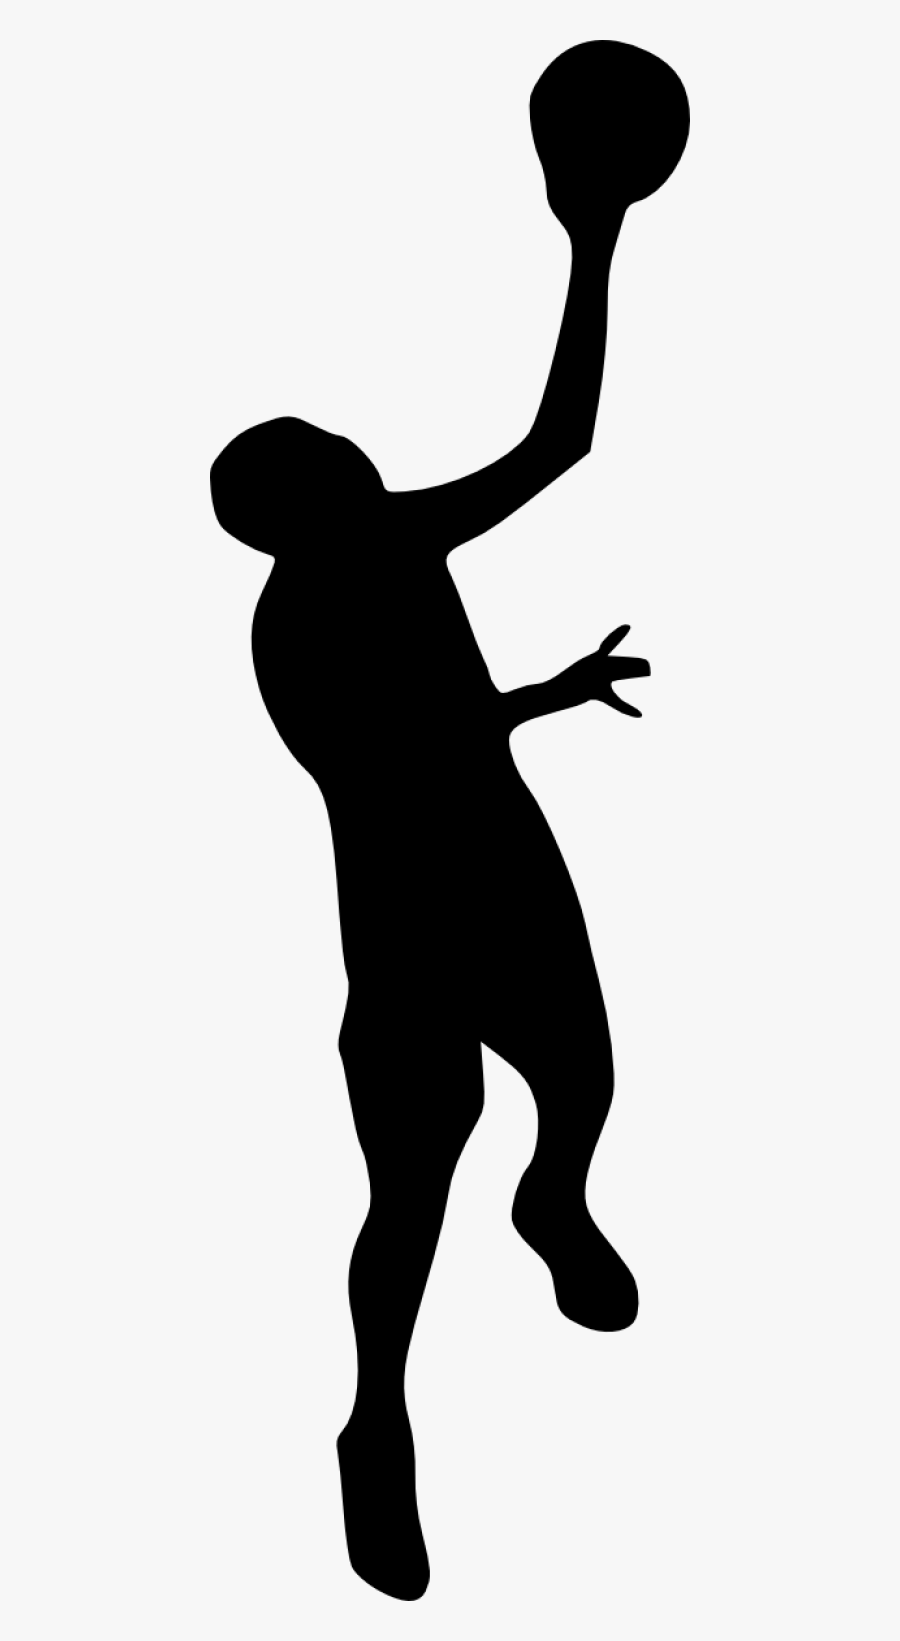 Transparent White Silhouette Png - Basketball Clipart Basketball Players Black And White, Transparent Clipart